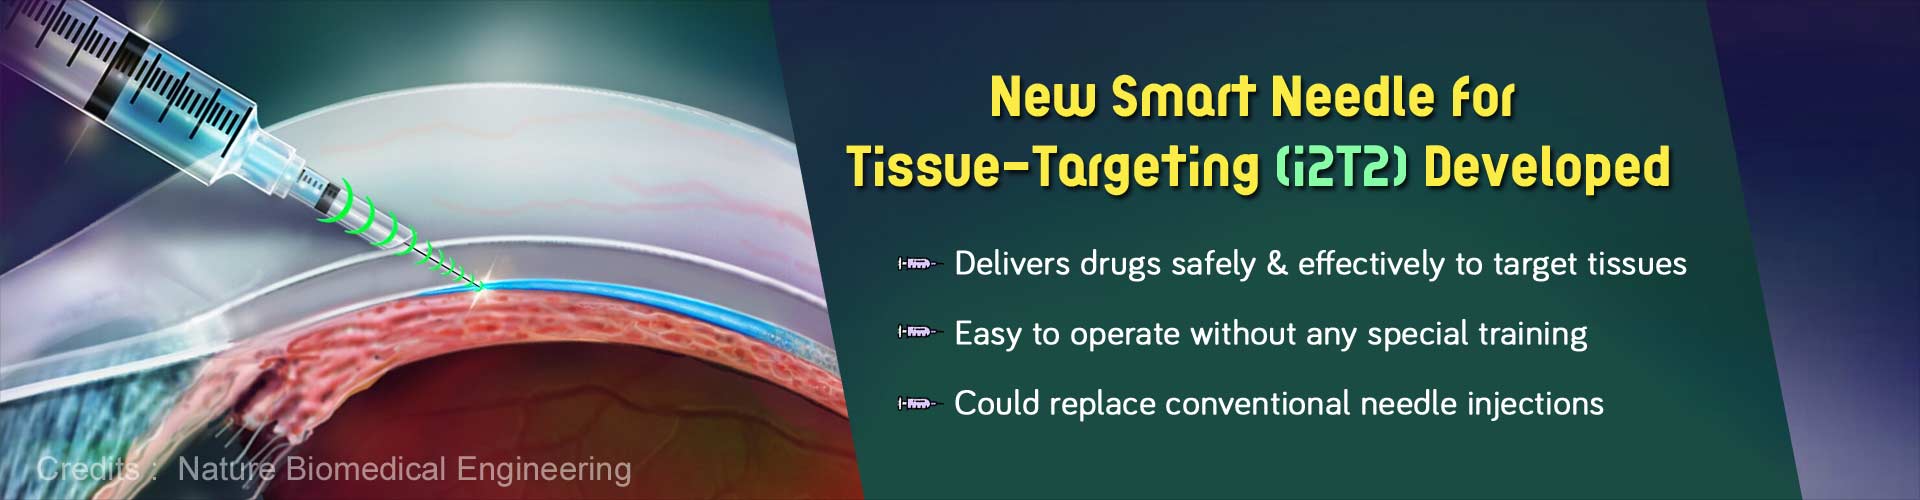 New smart needle invented for tissue-targeting (i2T2) developed. Delivers drugs safely and effectively to target tissues. Easy to operate without any special training. Could replace conventional needle injections.